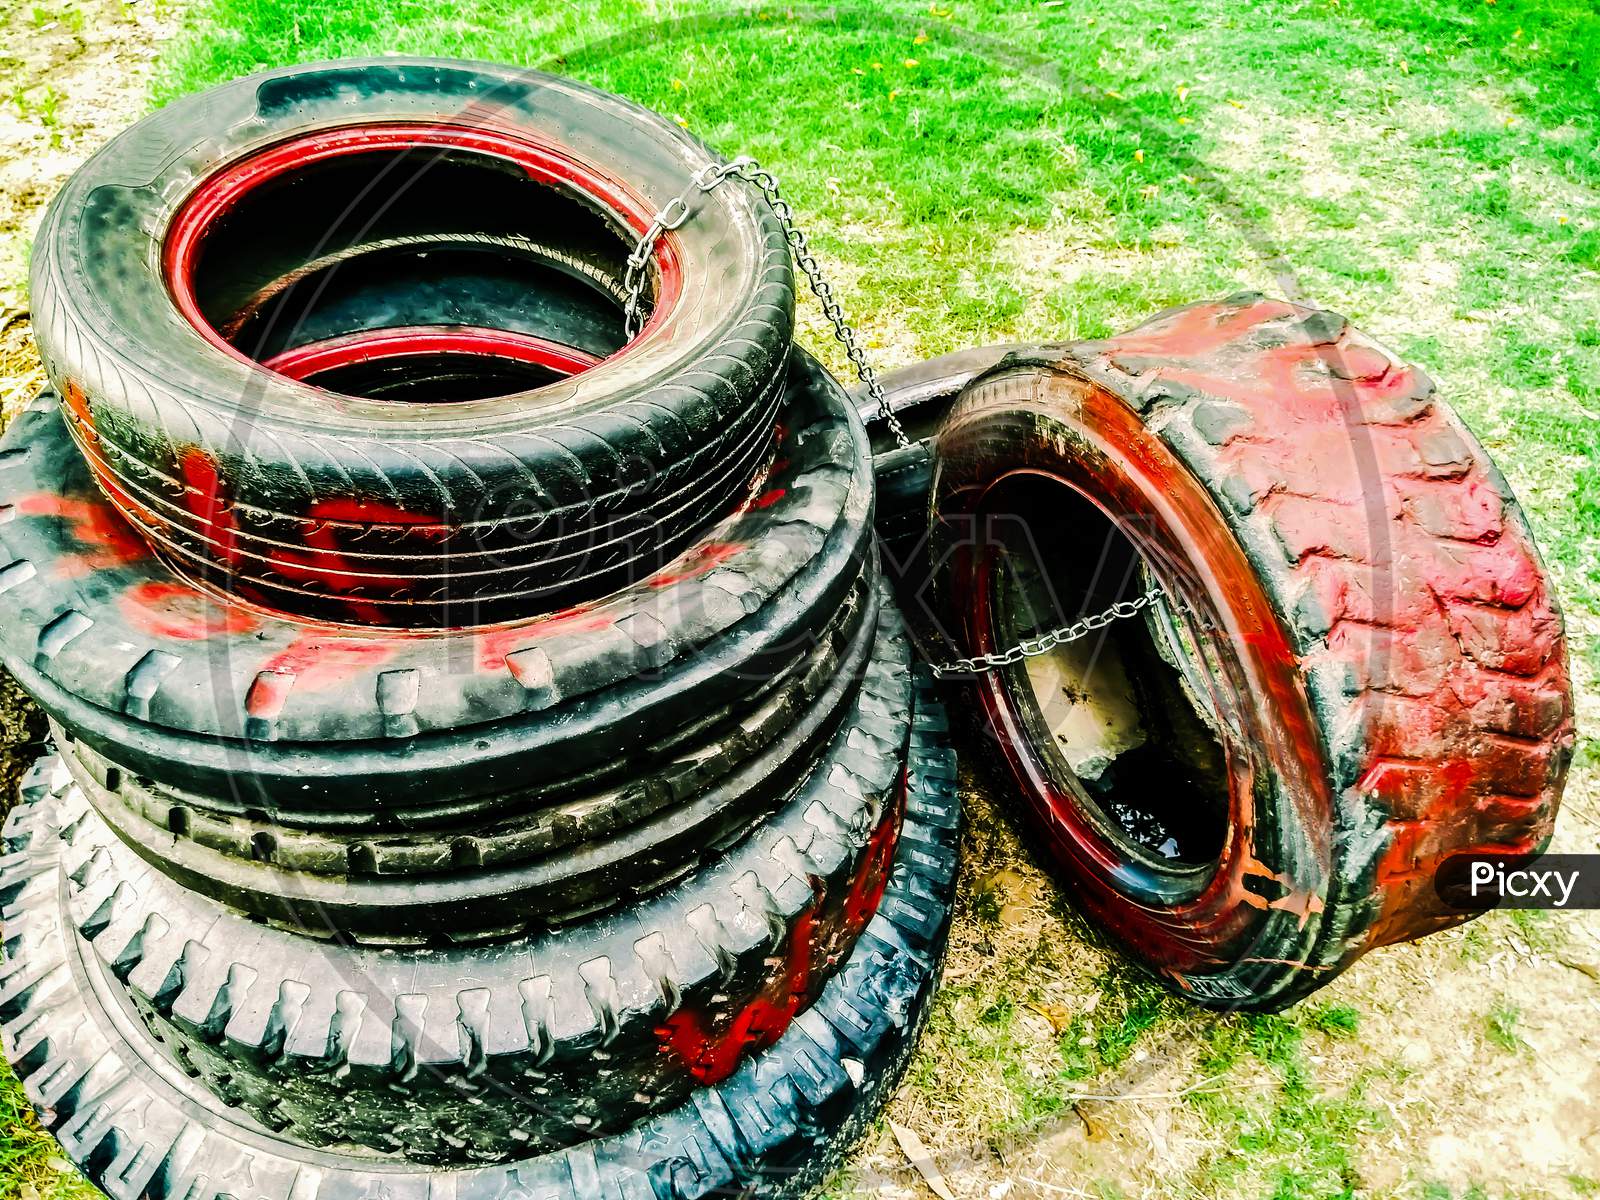 A picture of rubber tires